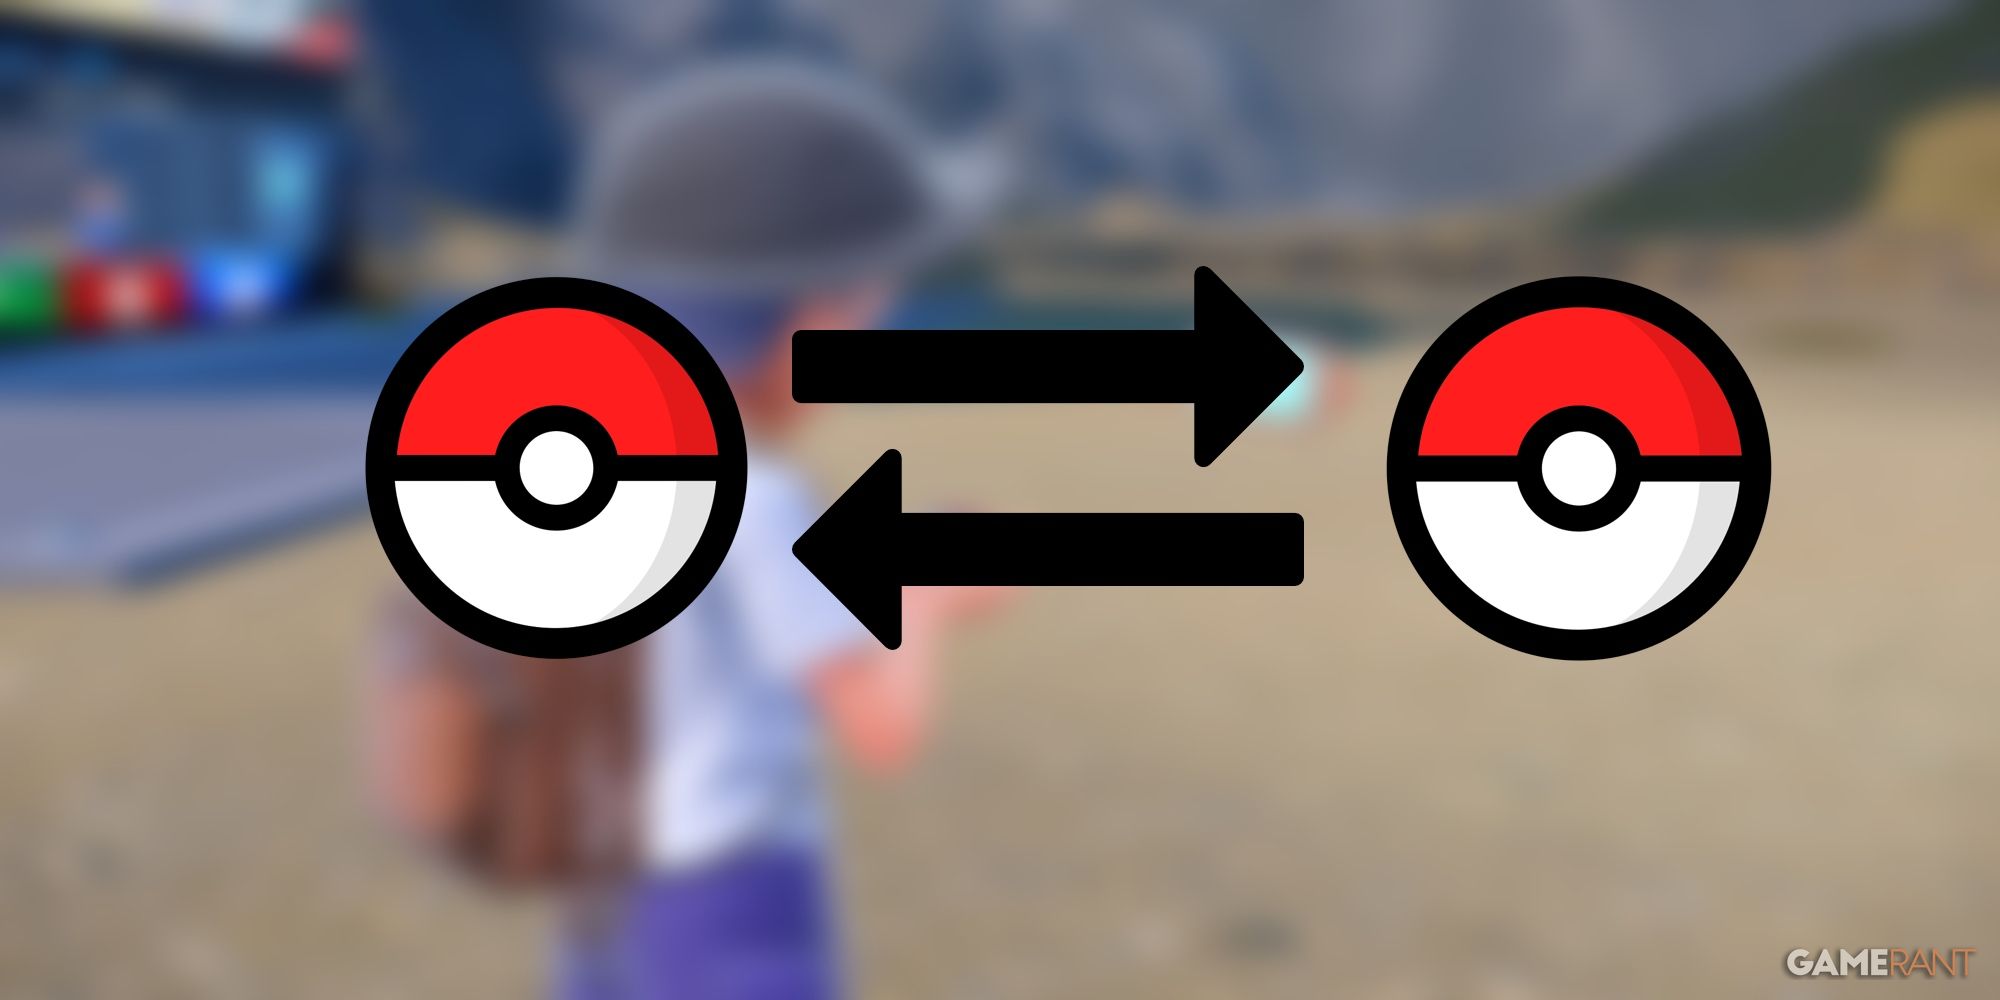 Get Special Pokémon By Connecting Scarlet and Violet To The App